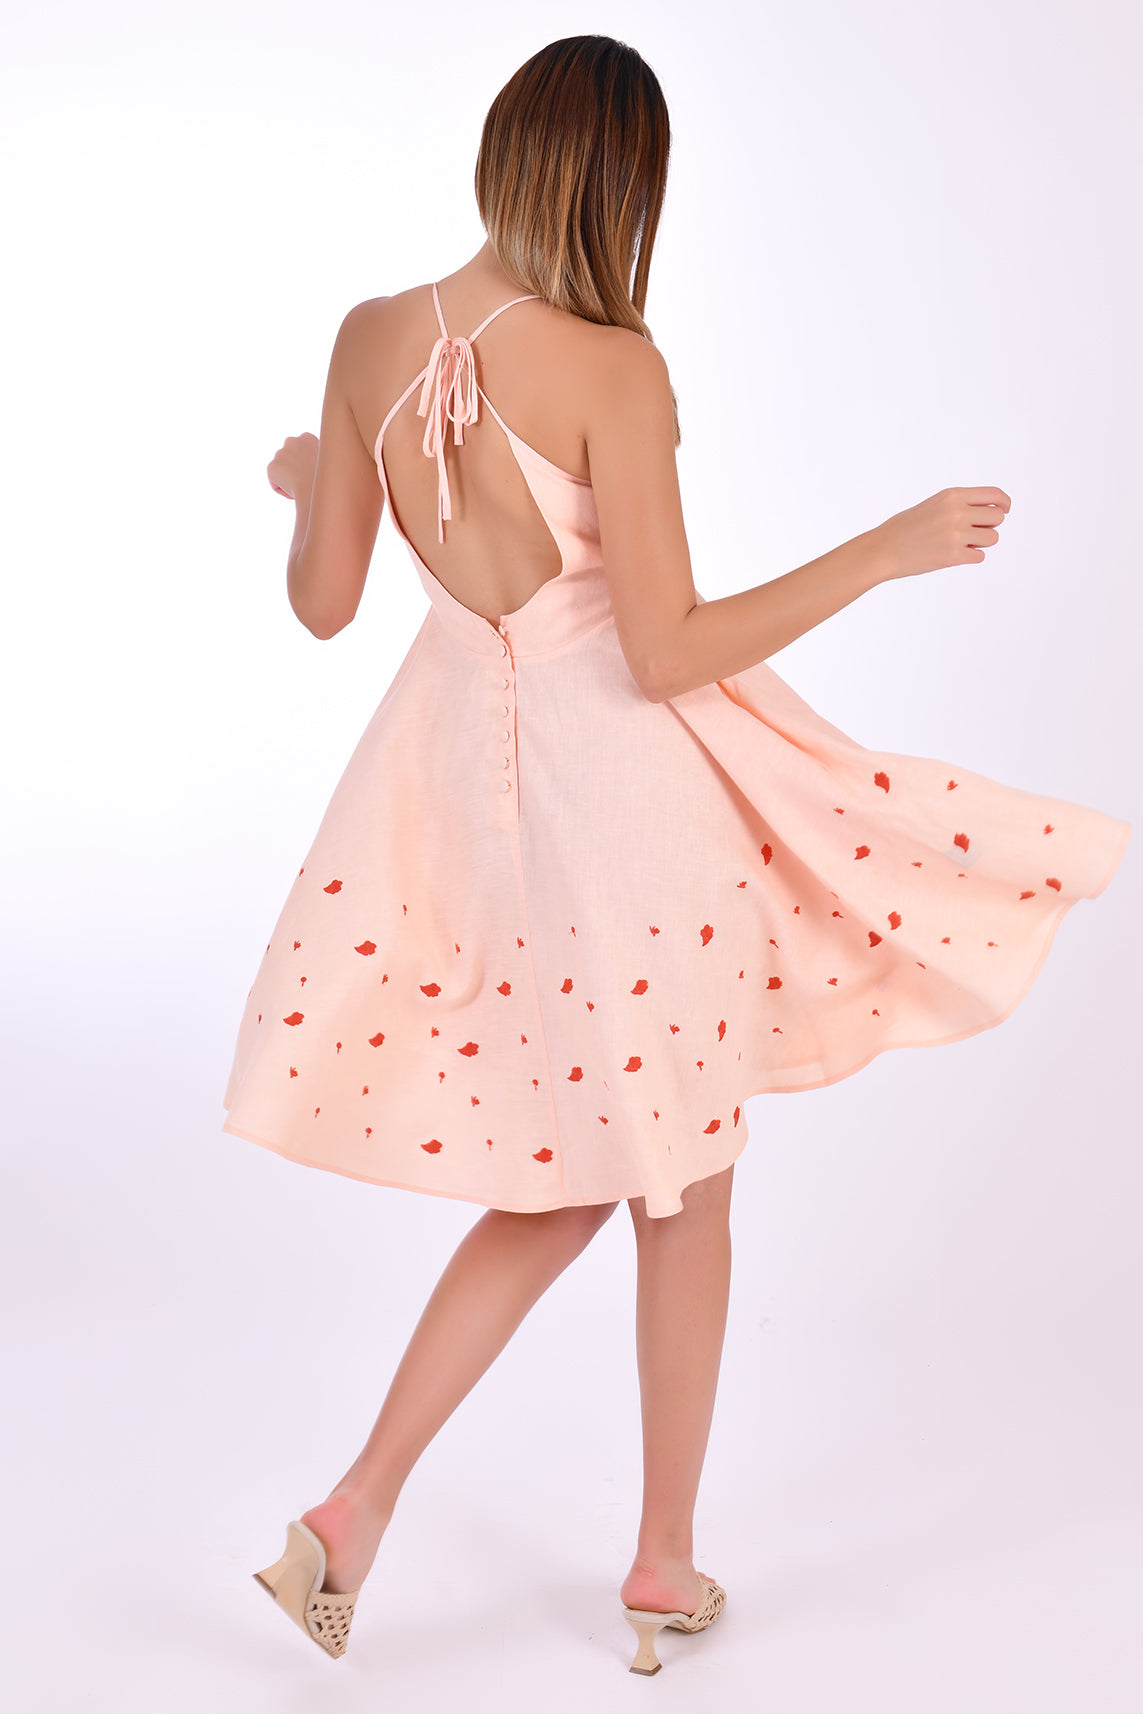 Fanm Mon Mella Dress, Back View. Showcases back tie and zipper closure, embroidery detail and movement of the fabric.  